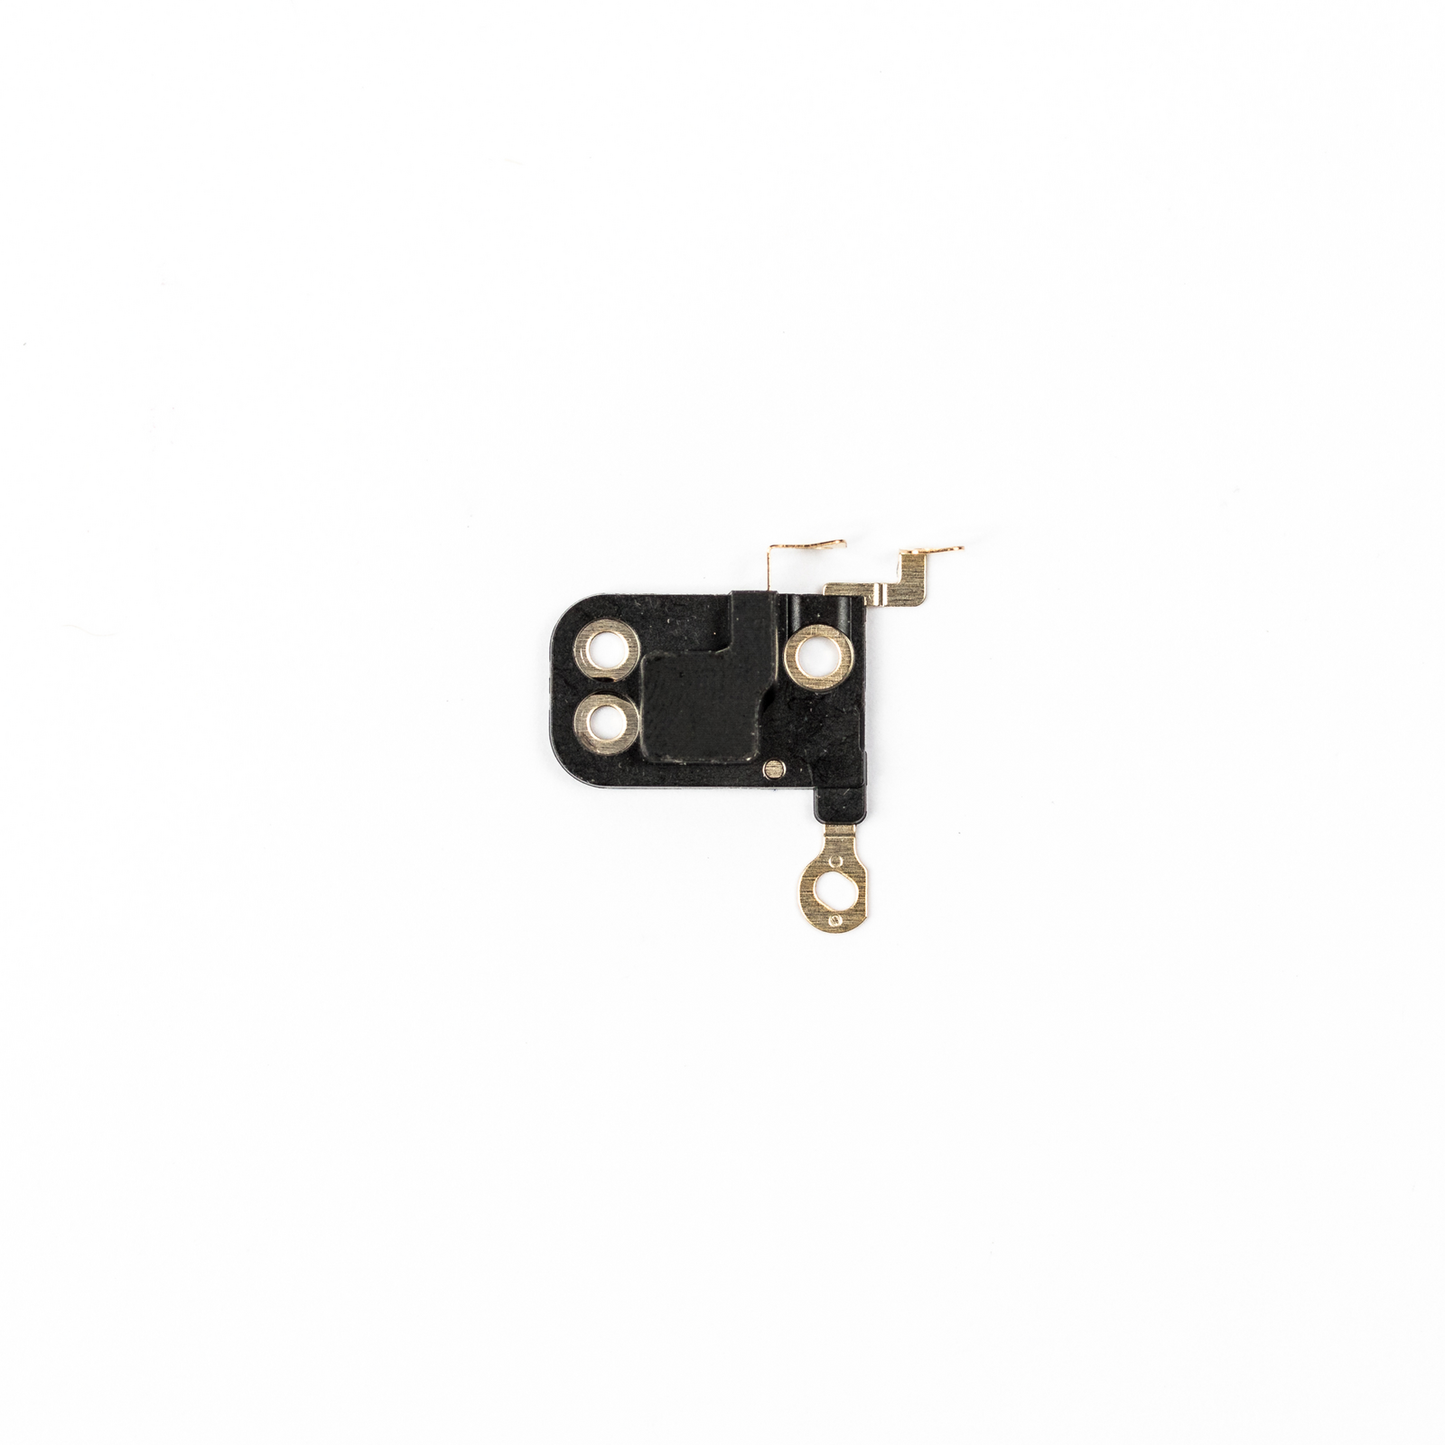 iPhone 6s Cellular Antenna Cover Bracket